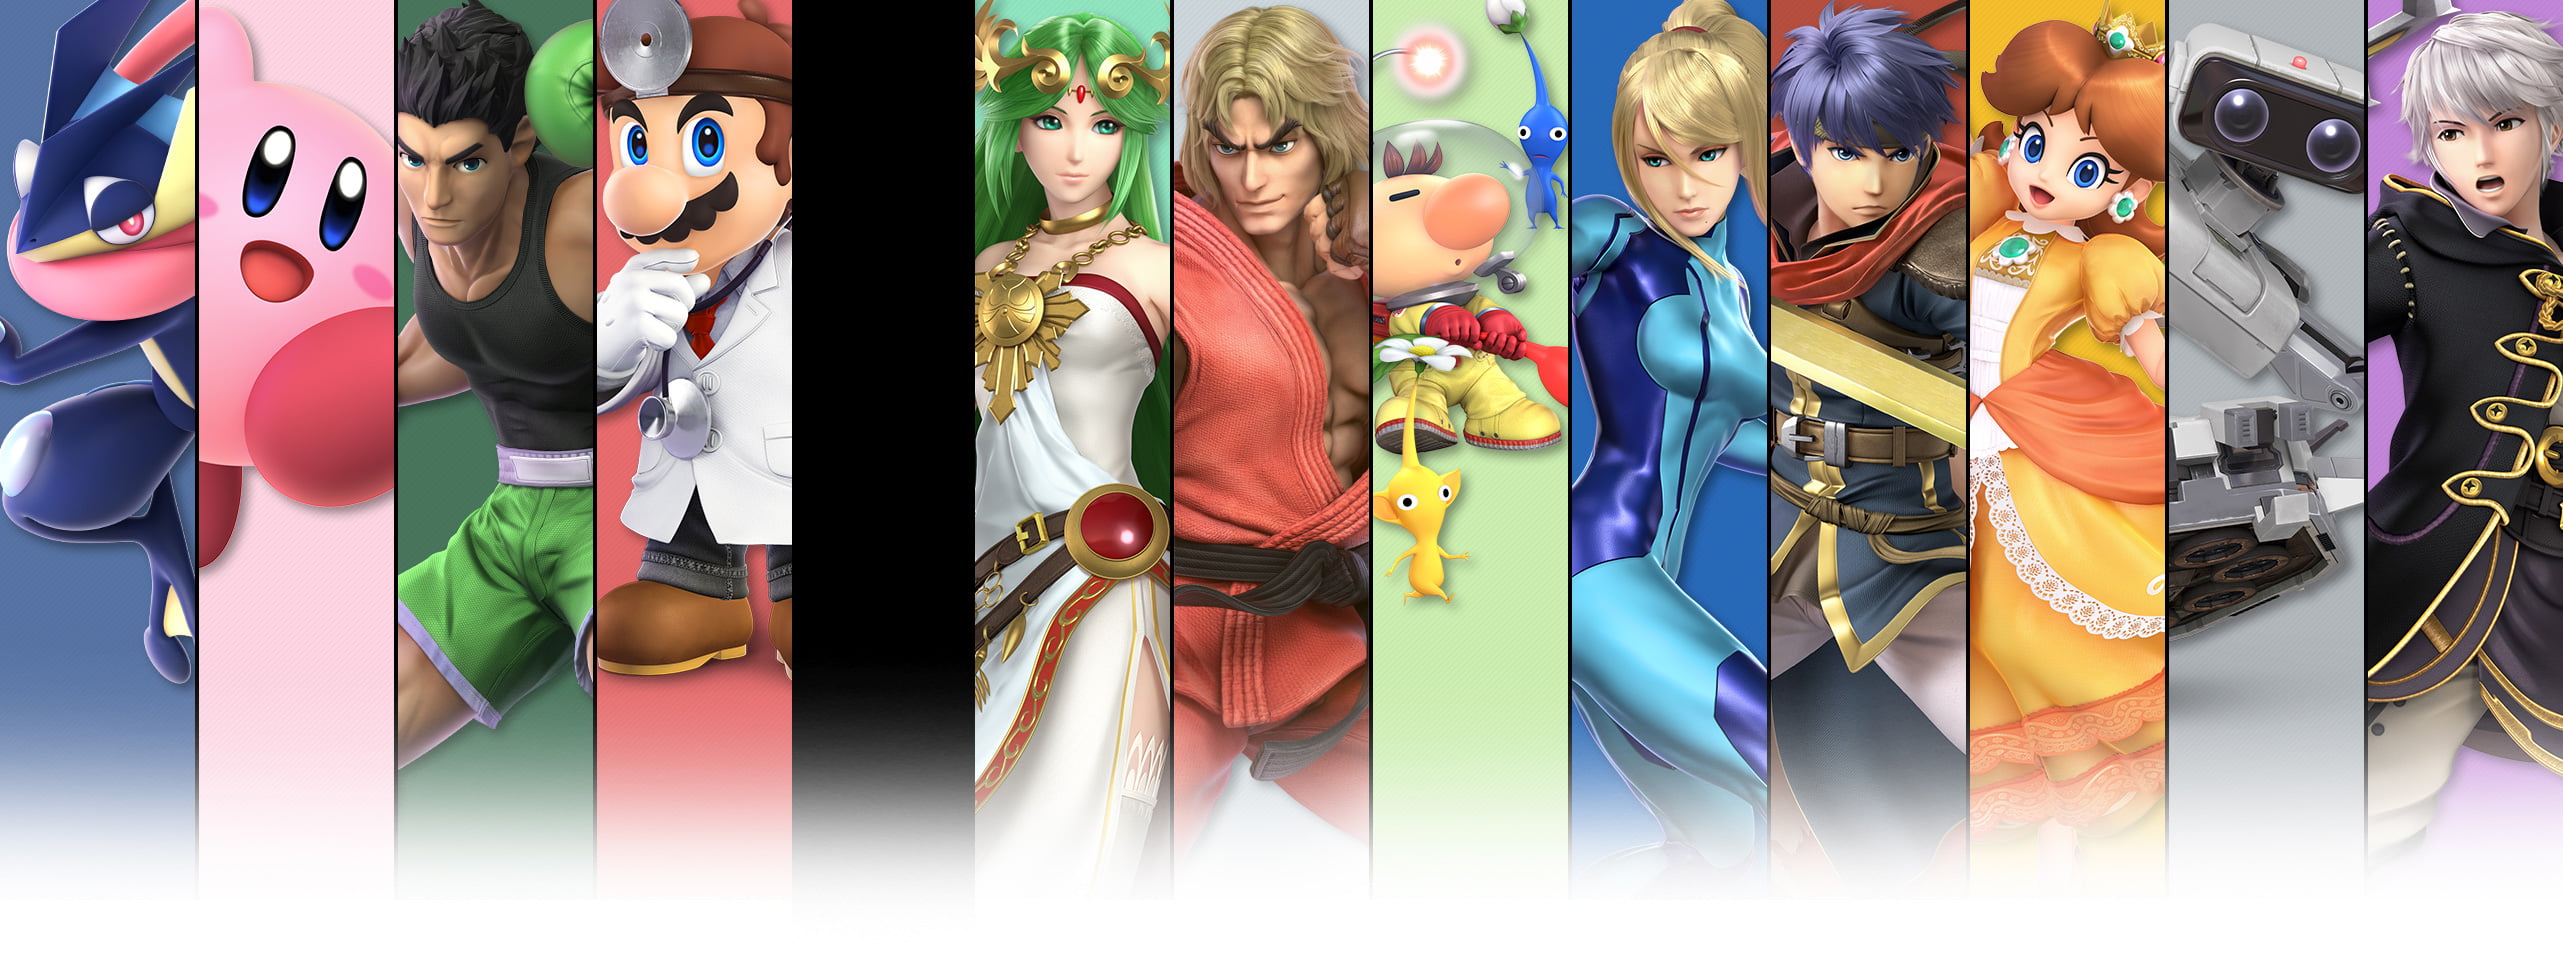 super smash bros ultimate characters list